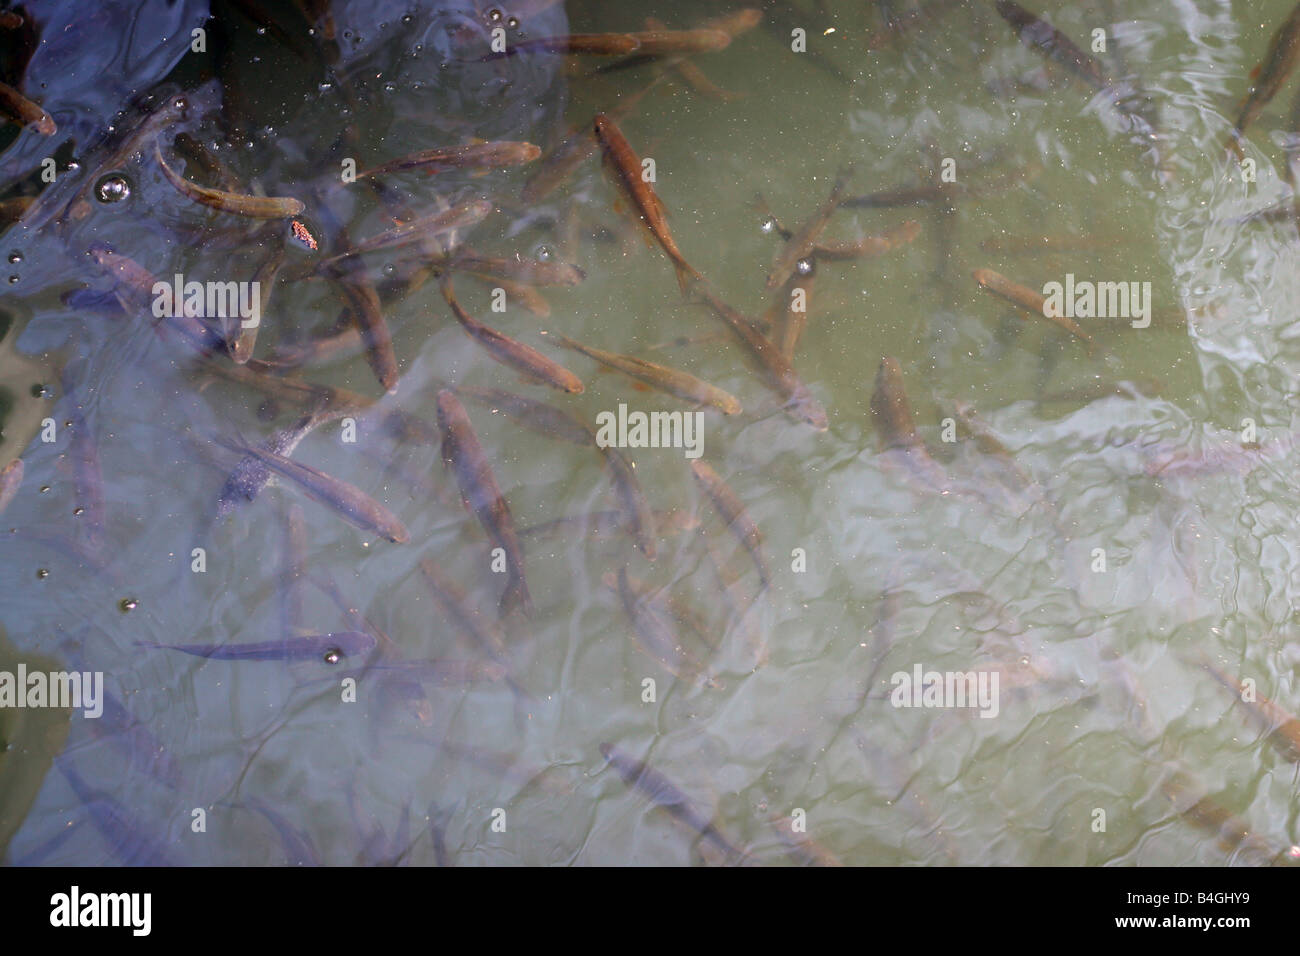 A large group of fish swimming under the surface of the water Stock Photo